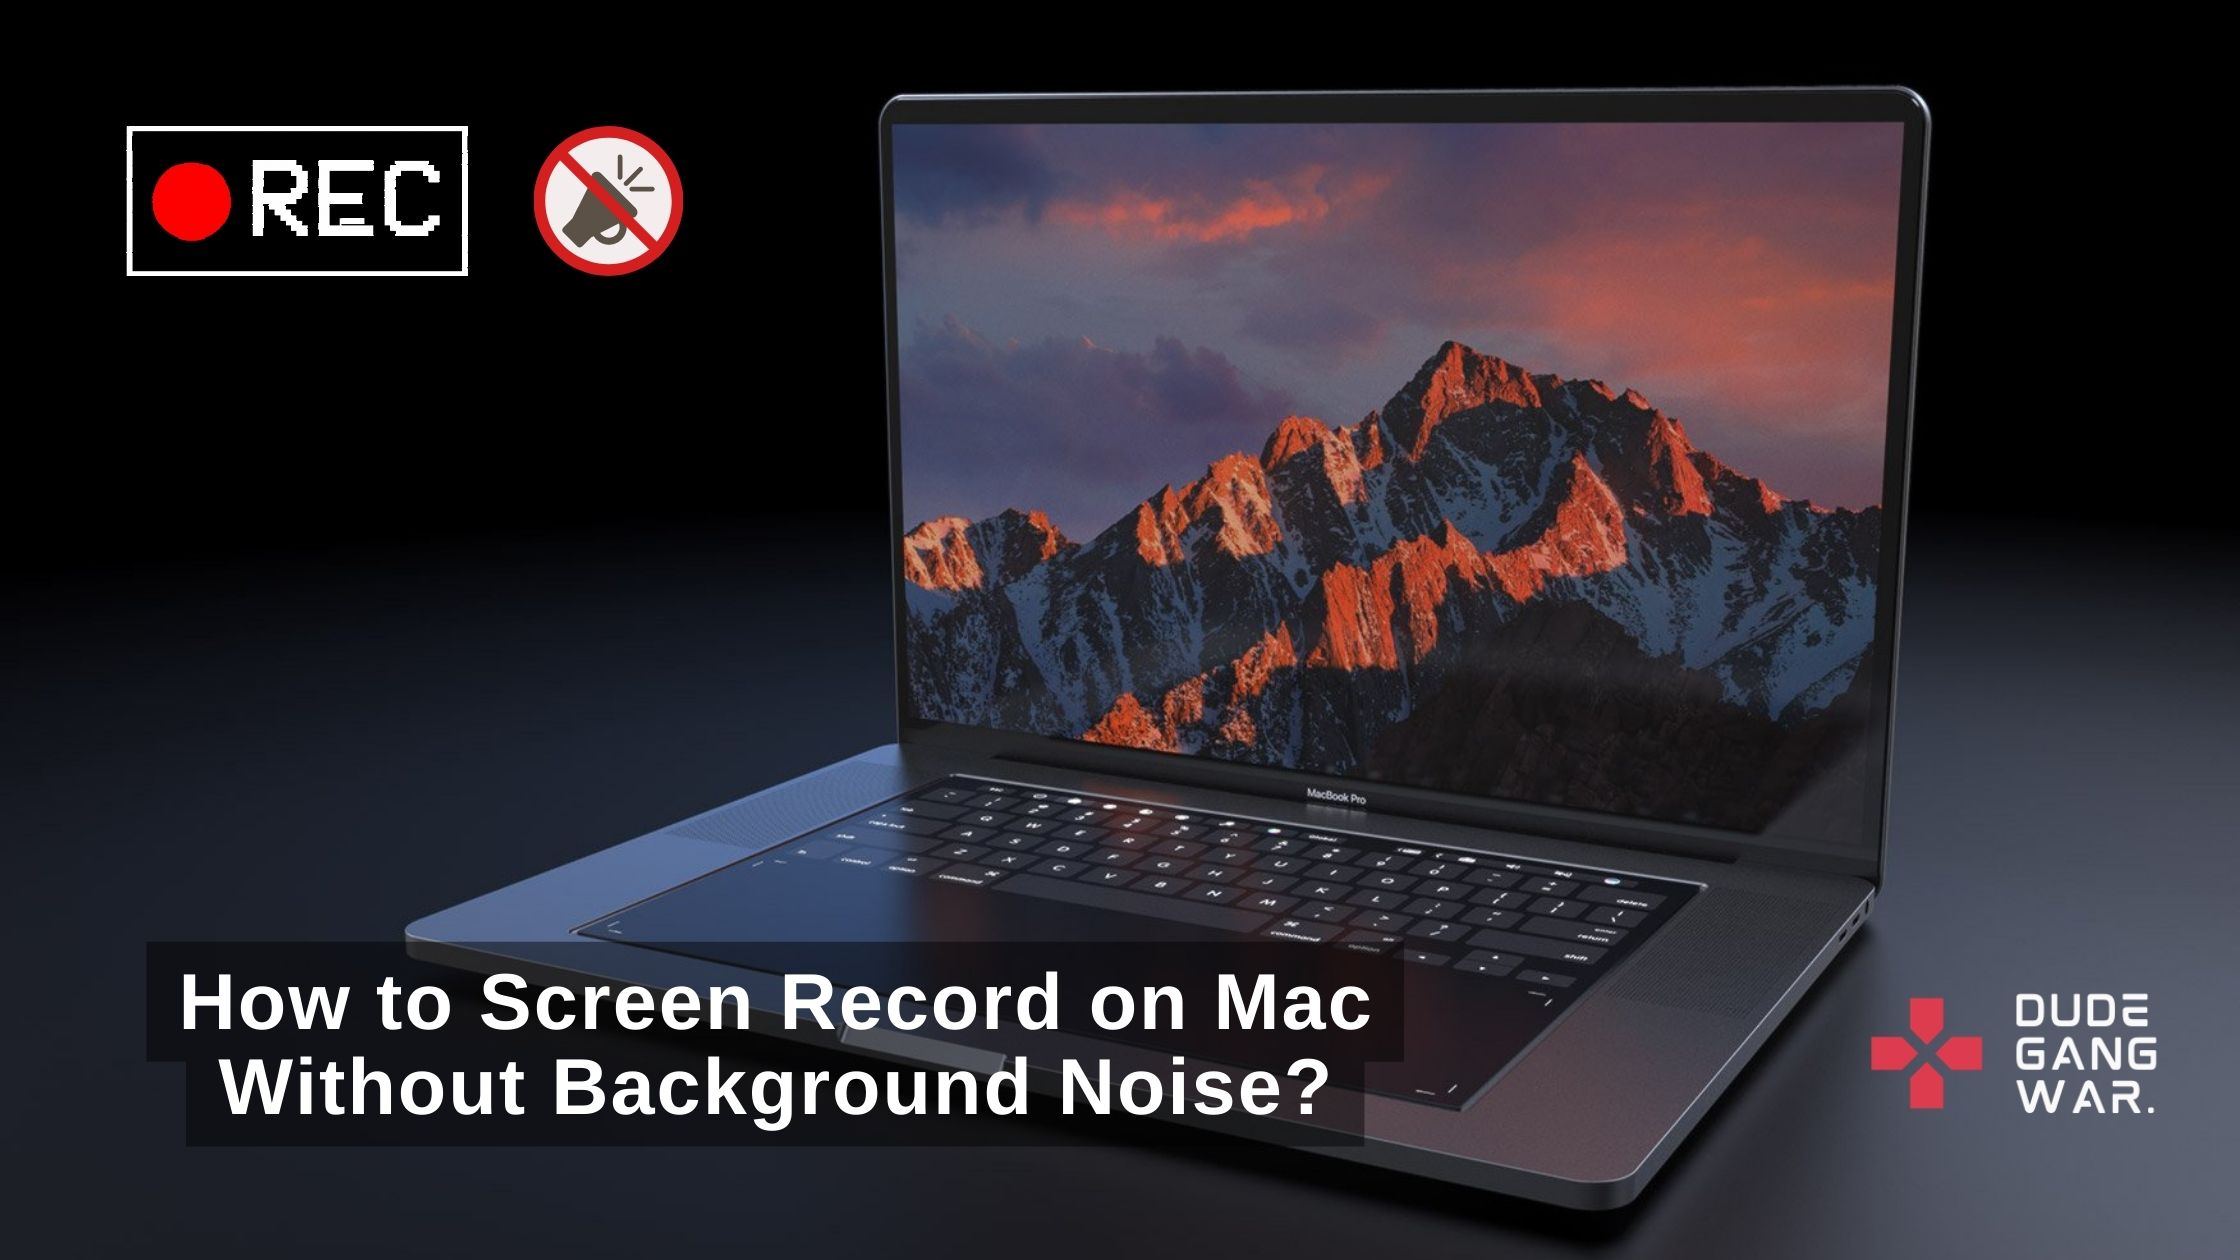 How to Screen Record on Mac Without Background Noise